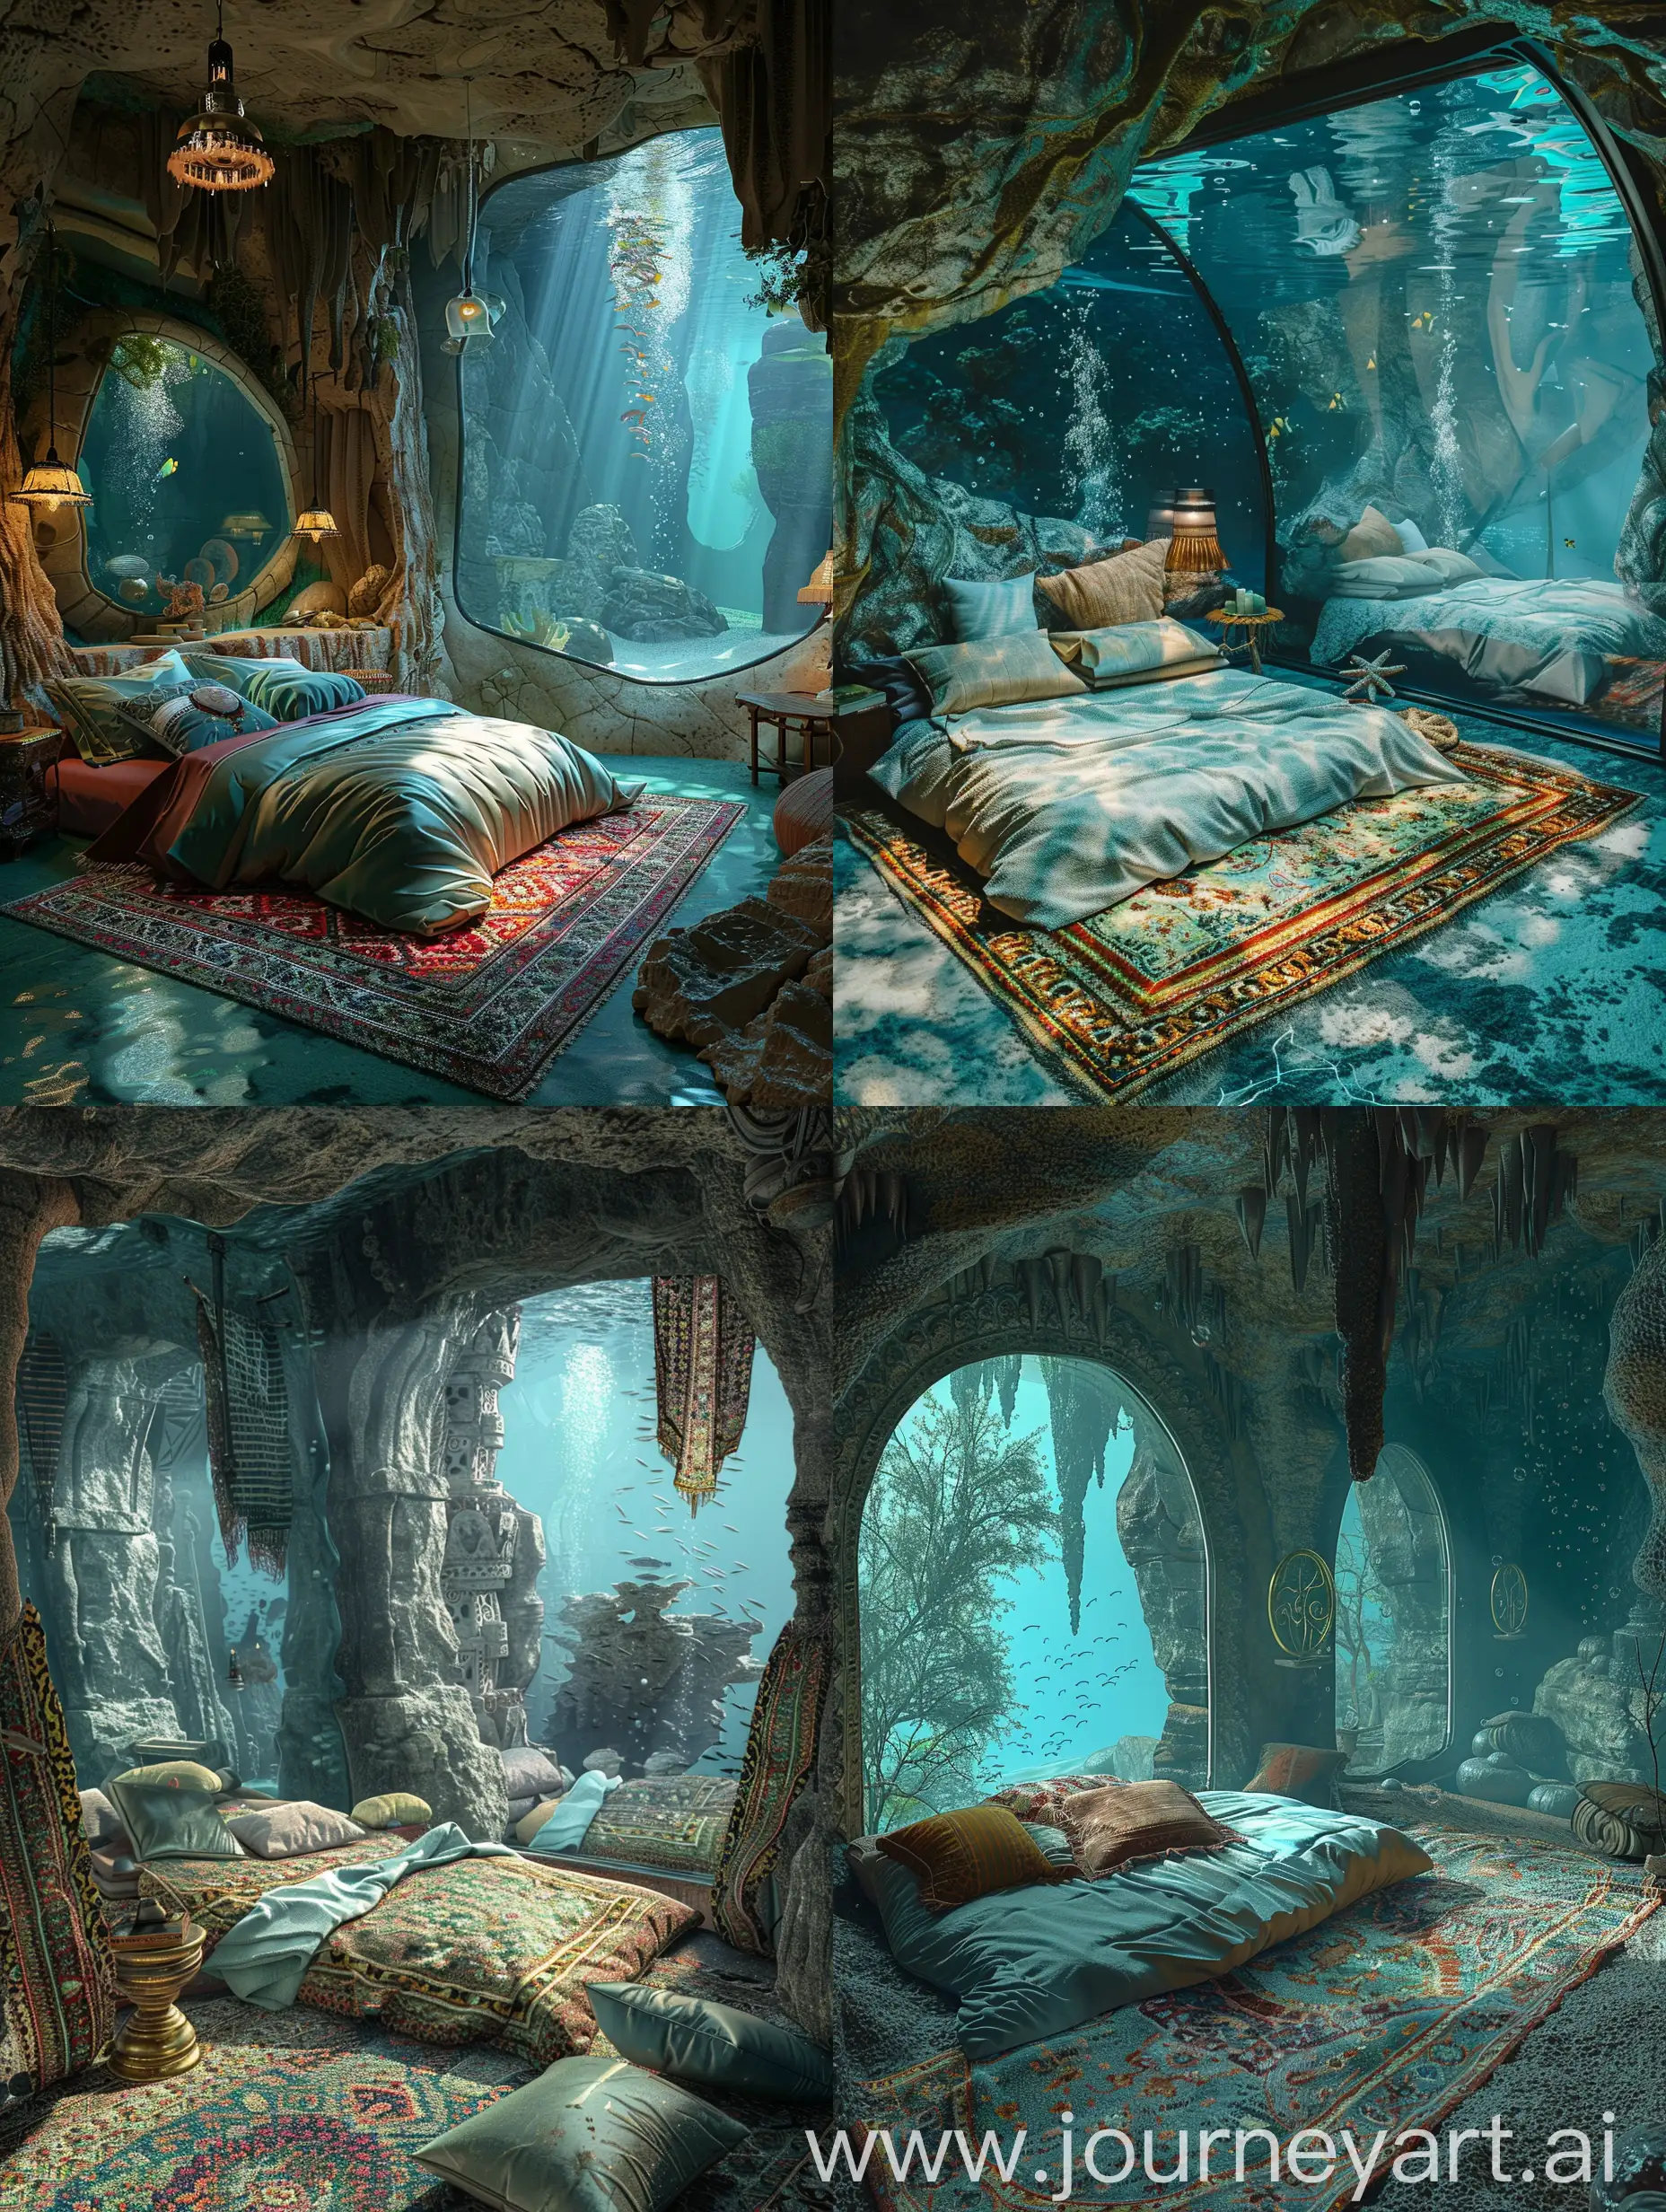  A cave bedroom interior in the underwater world, surreal photos, aesthetic mood, underwater sightseeing glass windows, simple bohemian warm bed and carpet, pillows, various bedroom furnishings, exquisite, aesthetic mood, extreme light and shadow effects, dreamlike, healing painting style, visual aesthetics, rich details, surrealism, virtual engine, perfect alkane rendering, masterpiece  